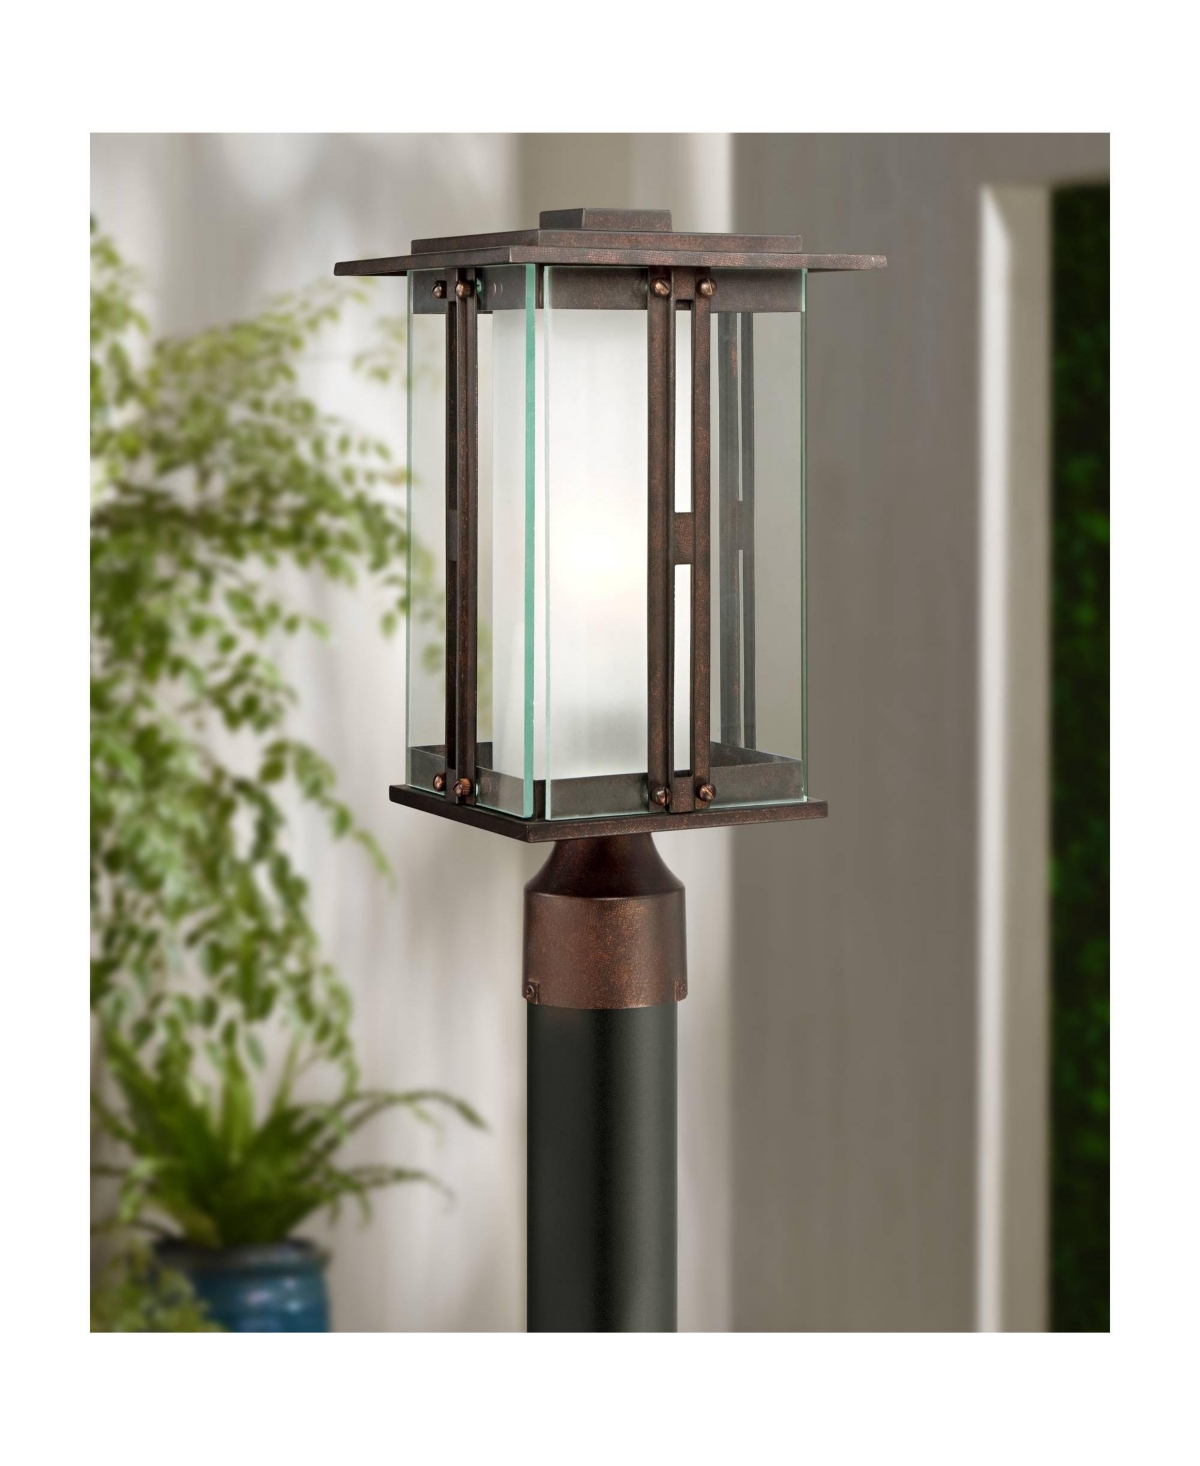 Fallbrook Collection Modern Industrial Outdoor Post Light Fixture Bronze Steel 15 3/4" Clear Frosted Double Glass Lantern for Exterior House Porch Pat